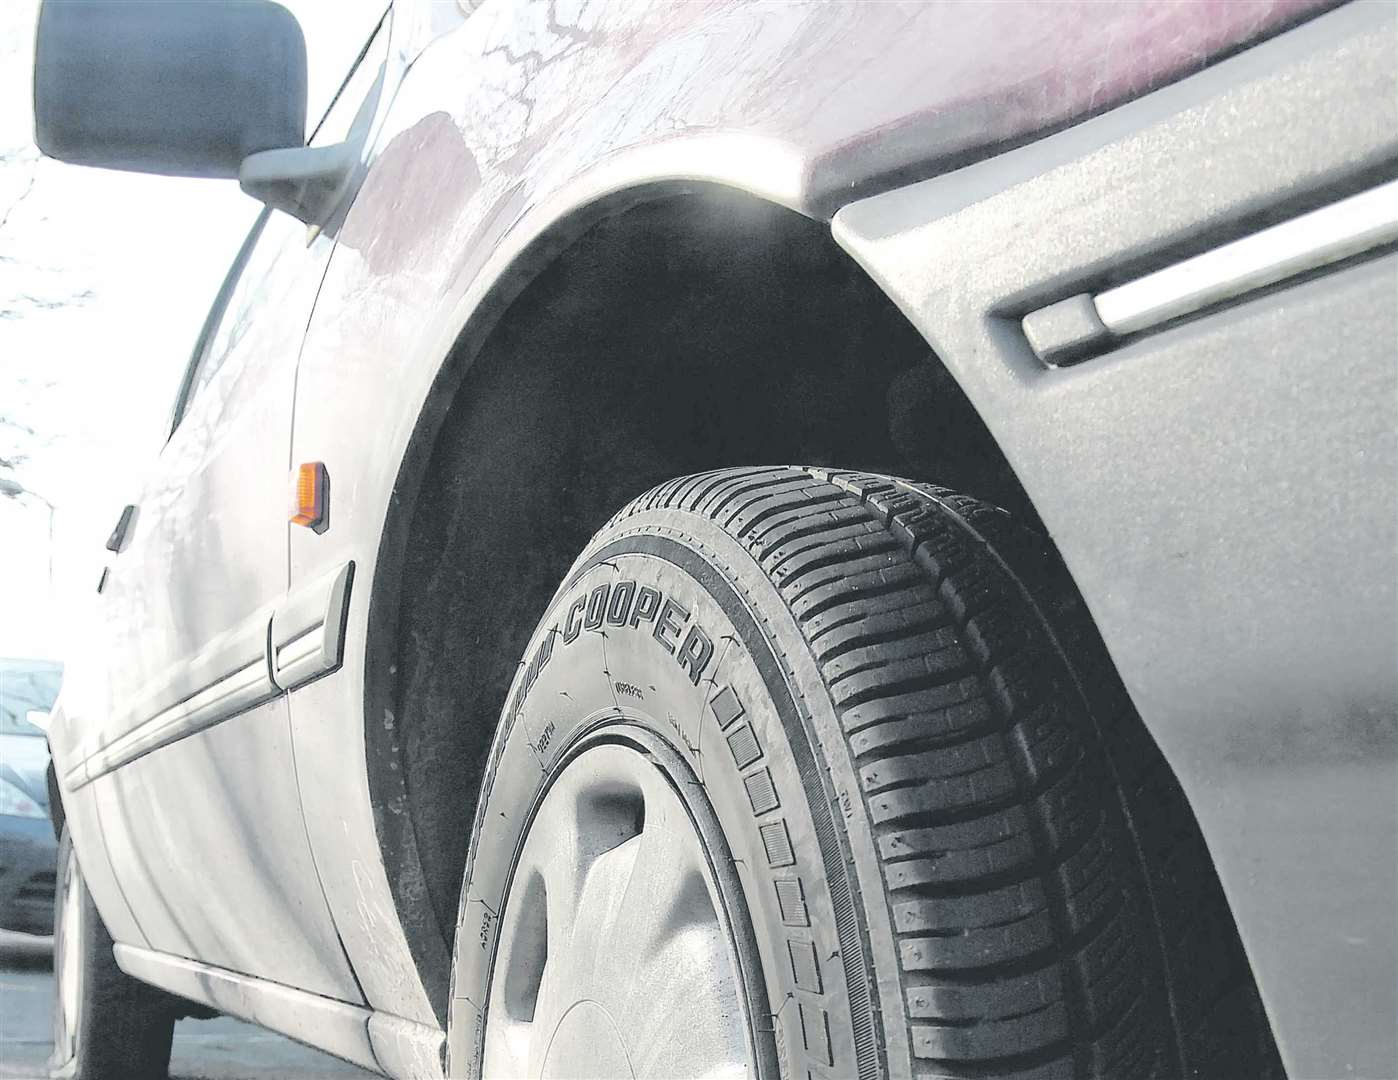 All tyres, even spare car tyres, are subject to the same regulations